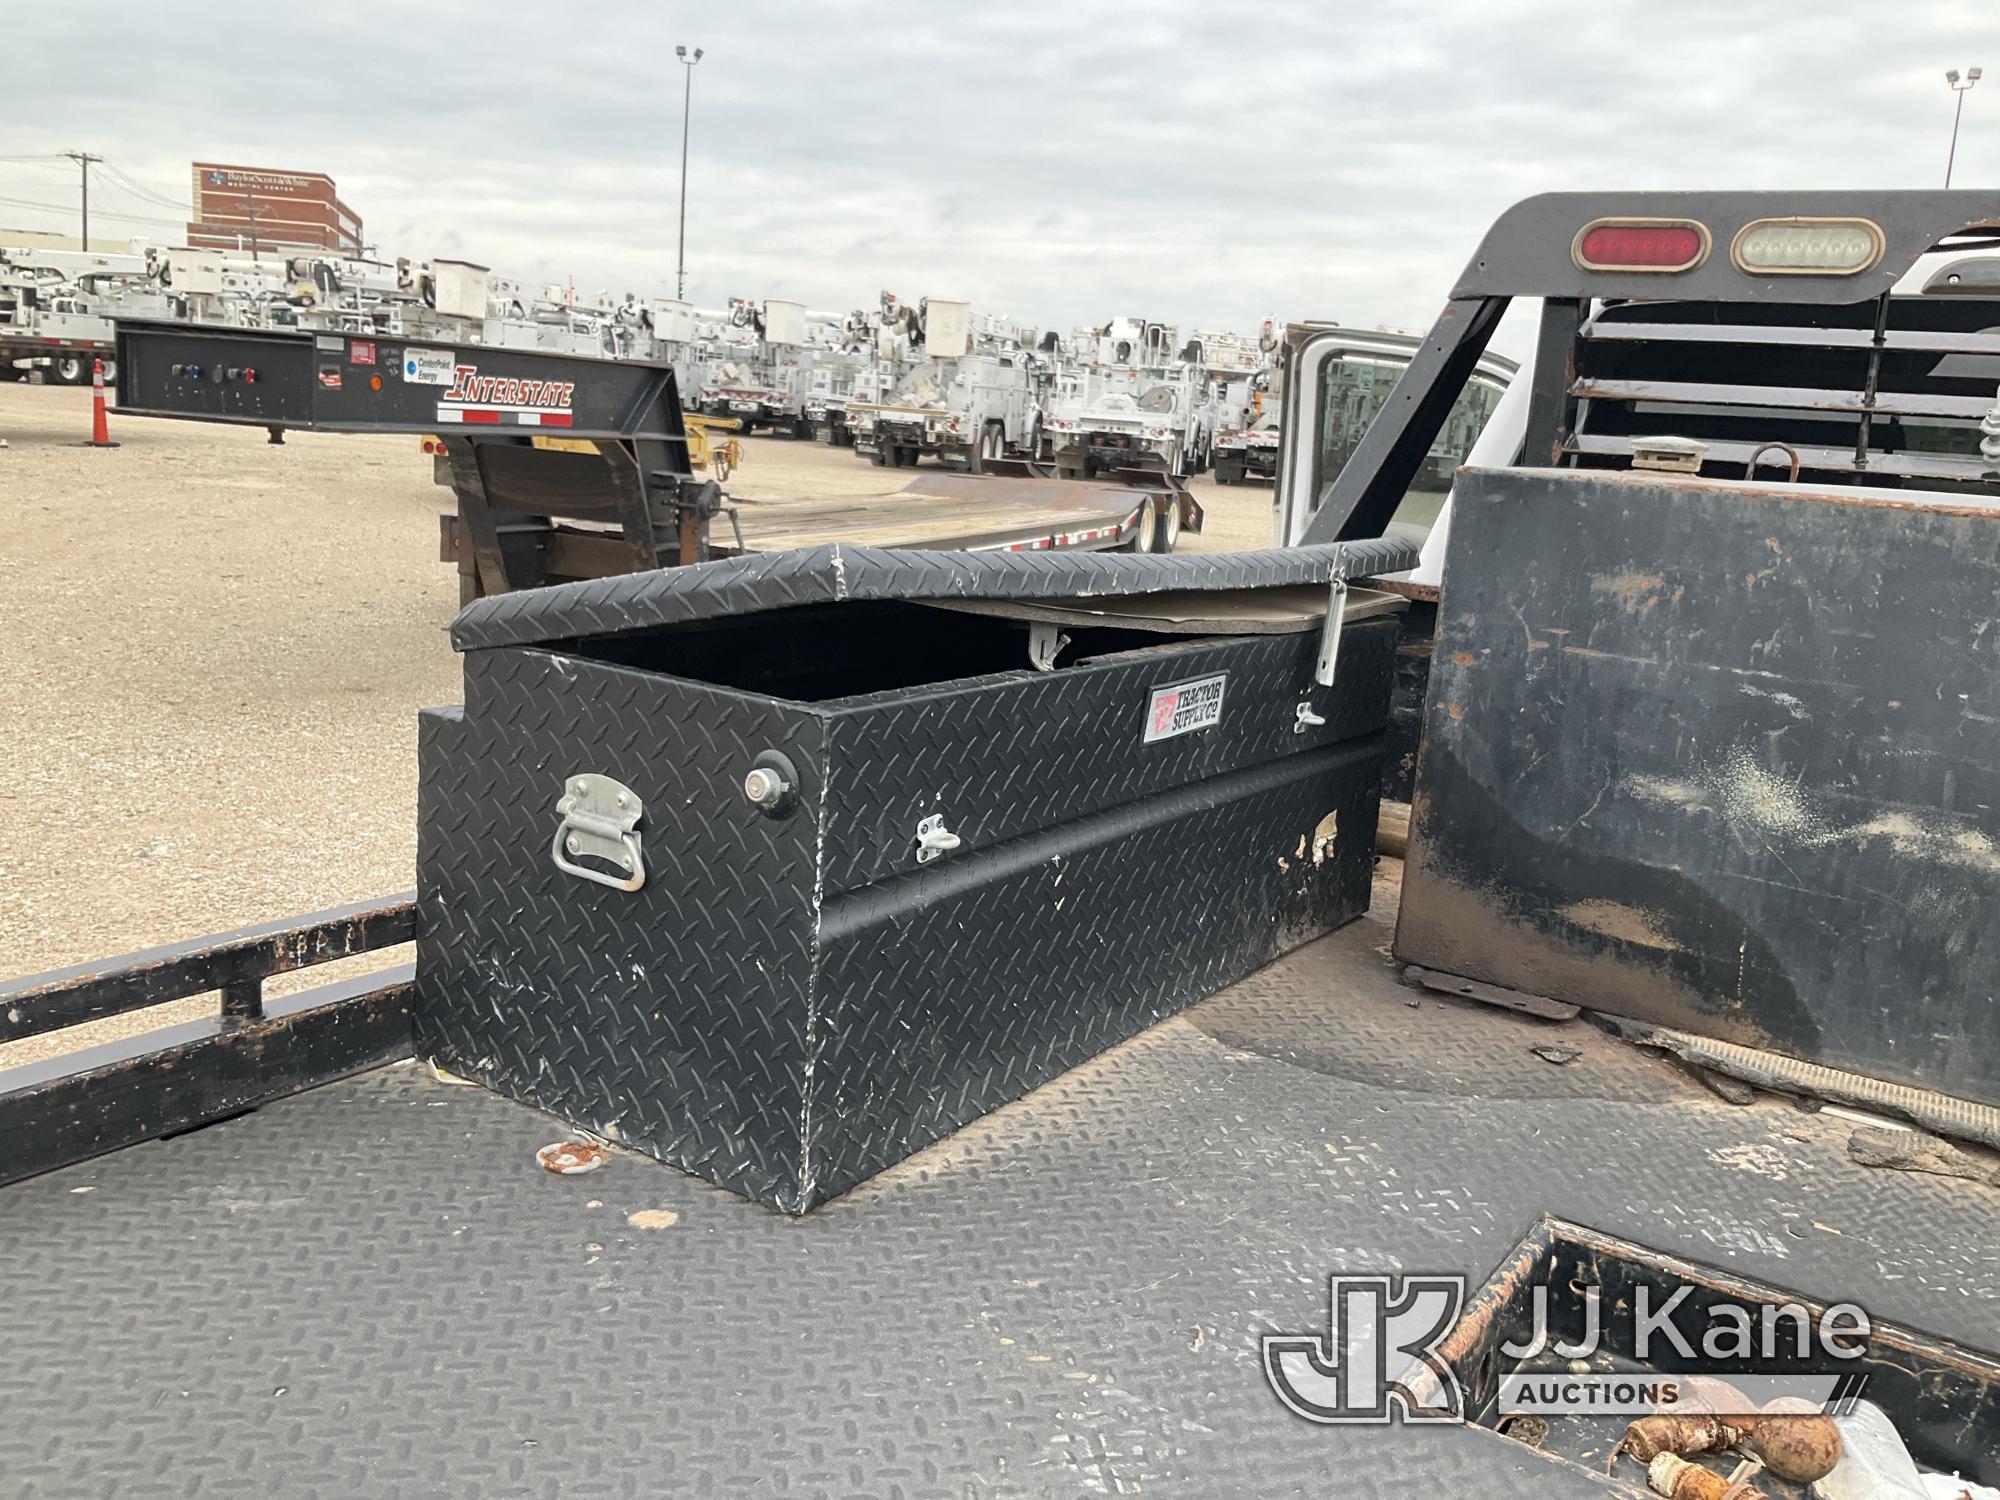 (Waxahachie, TX) 2019 Ford F350 4x4 Crew-Cab Flatbed Truck Runs & Moves) (Jump To Start, Check Engin